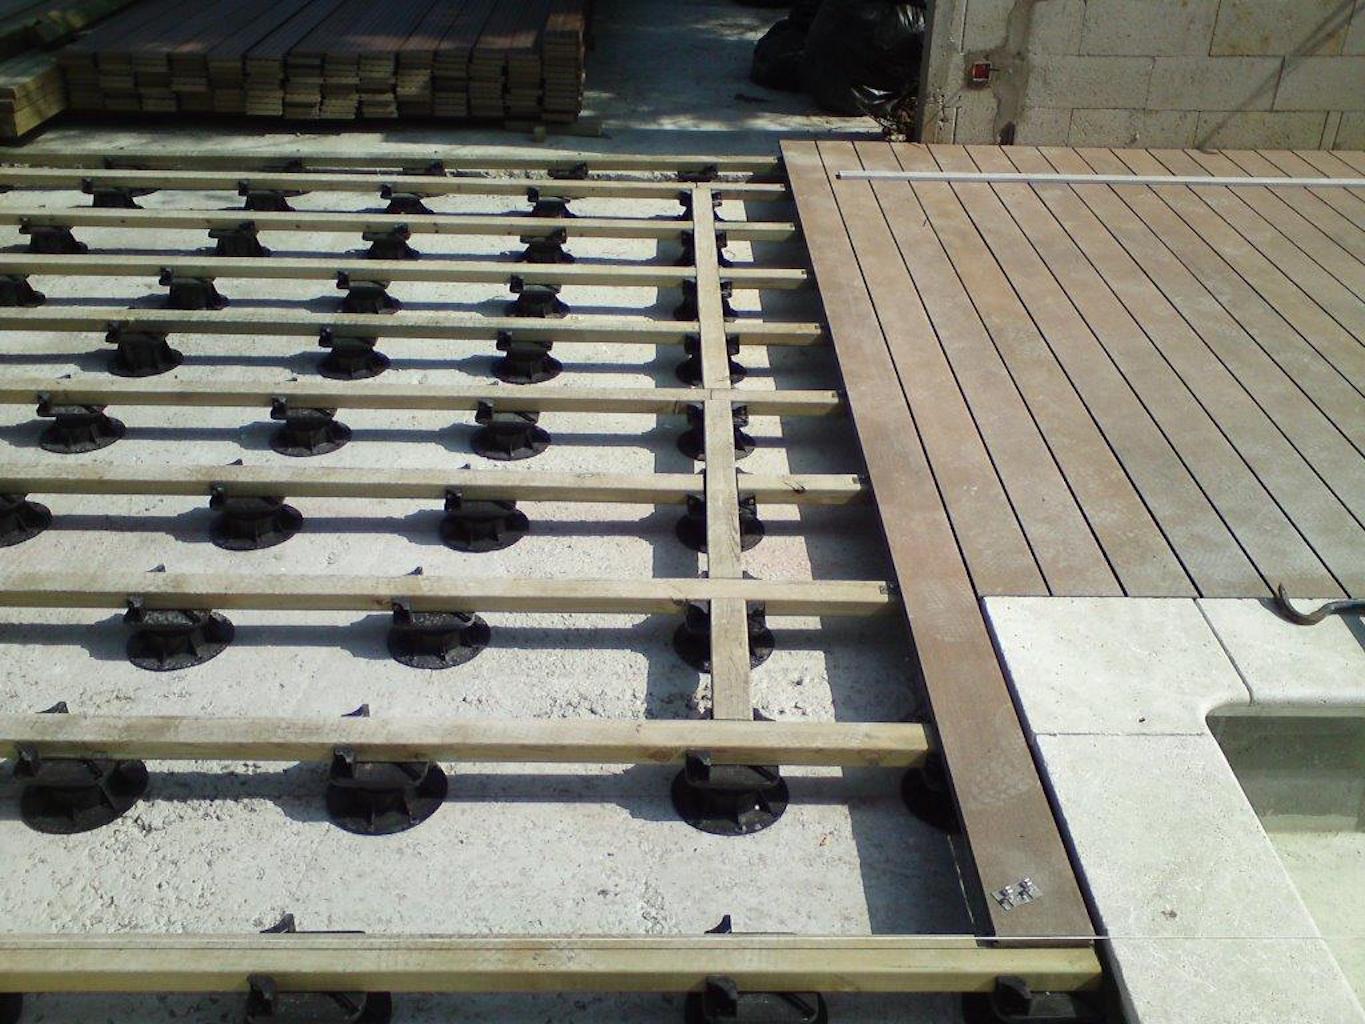 Buzon Pedestal Deck System with Joist Supports and Board Decking